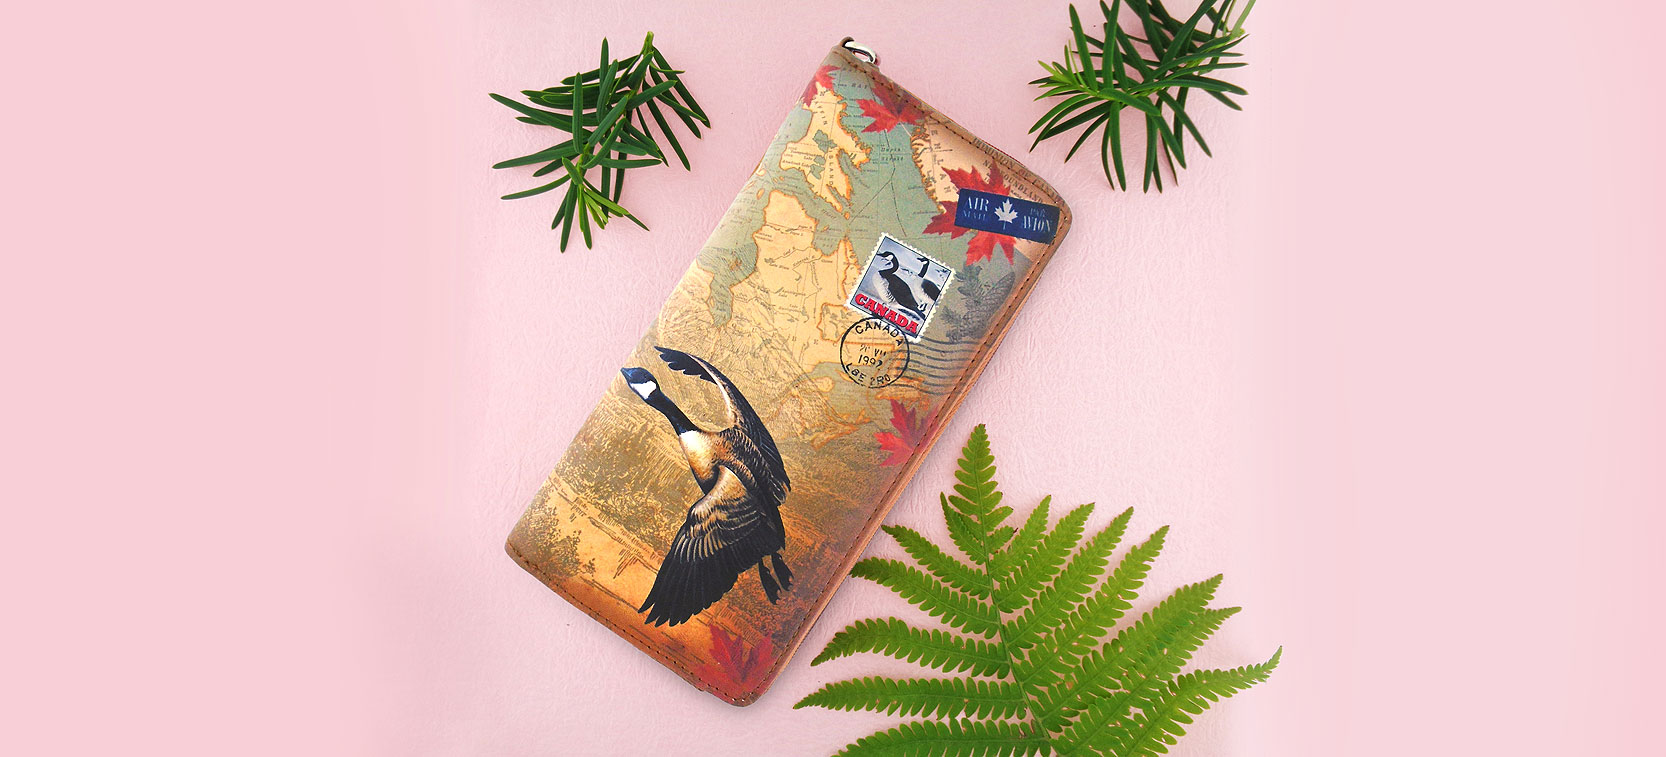 LAVISHY design and wholesale goose themed vegan accessories and gfits to gift shops, boutiques and garden centers, botanical garden gift stores in Canada, USA and worldwide.